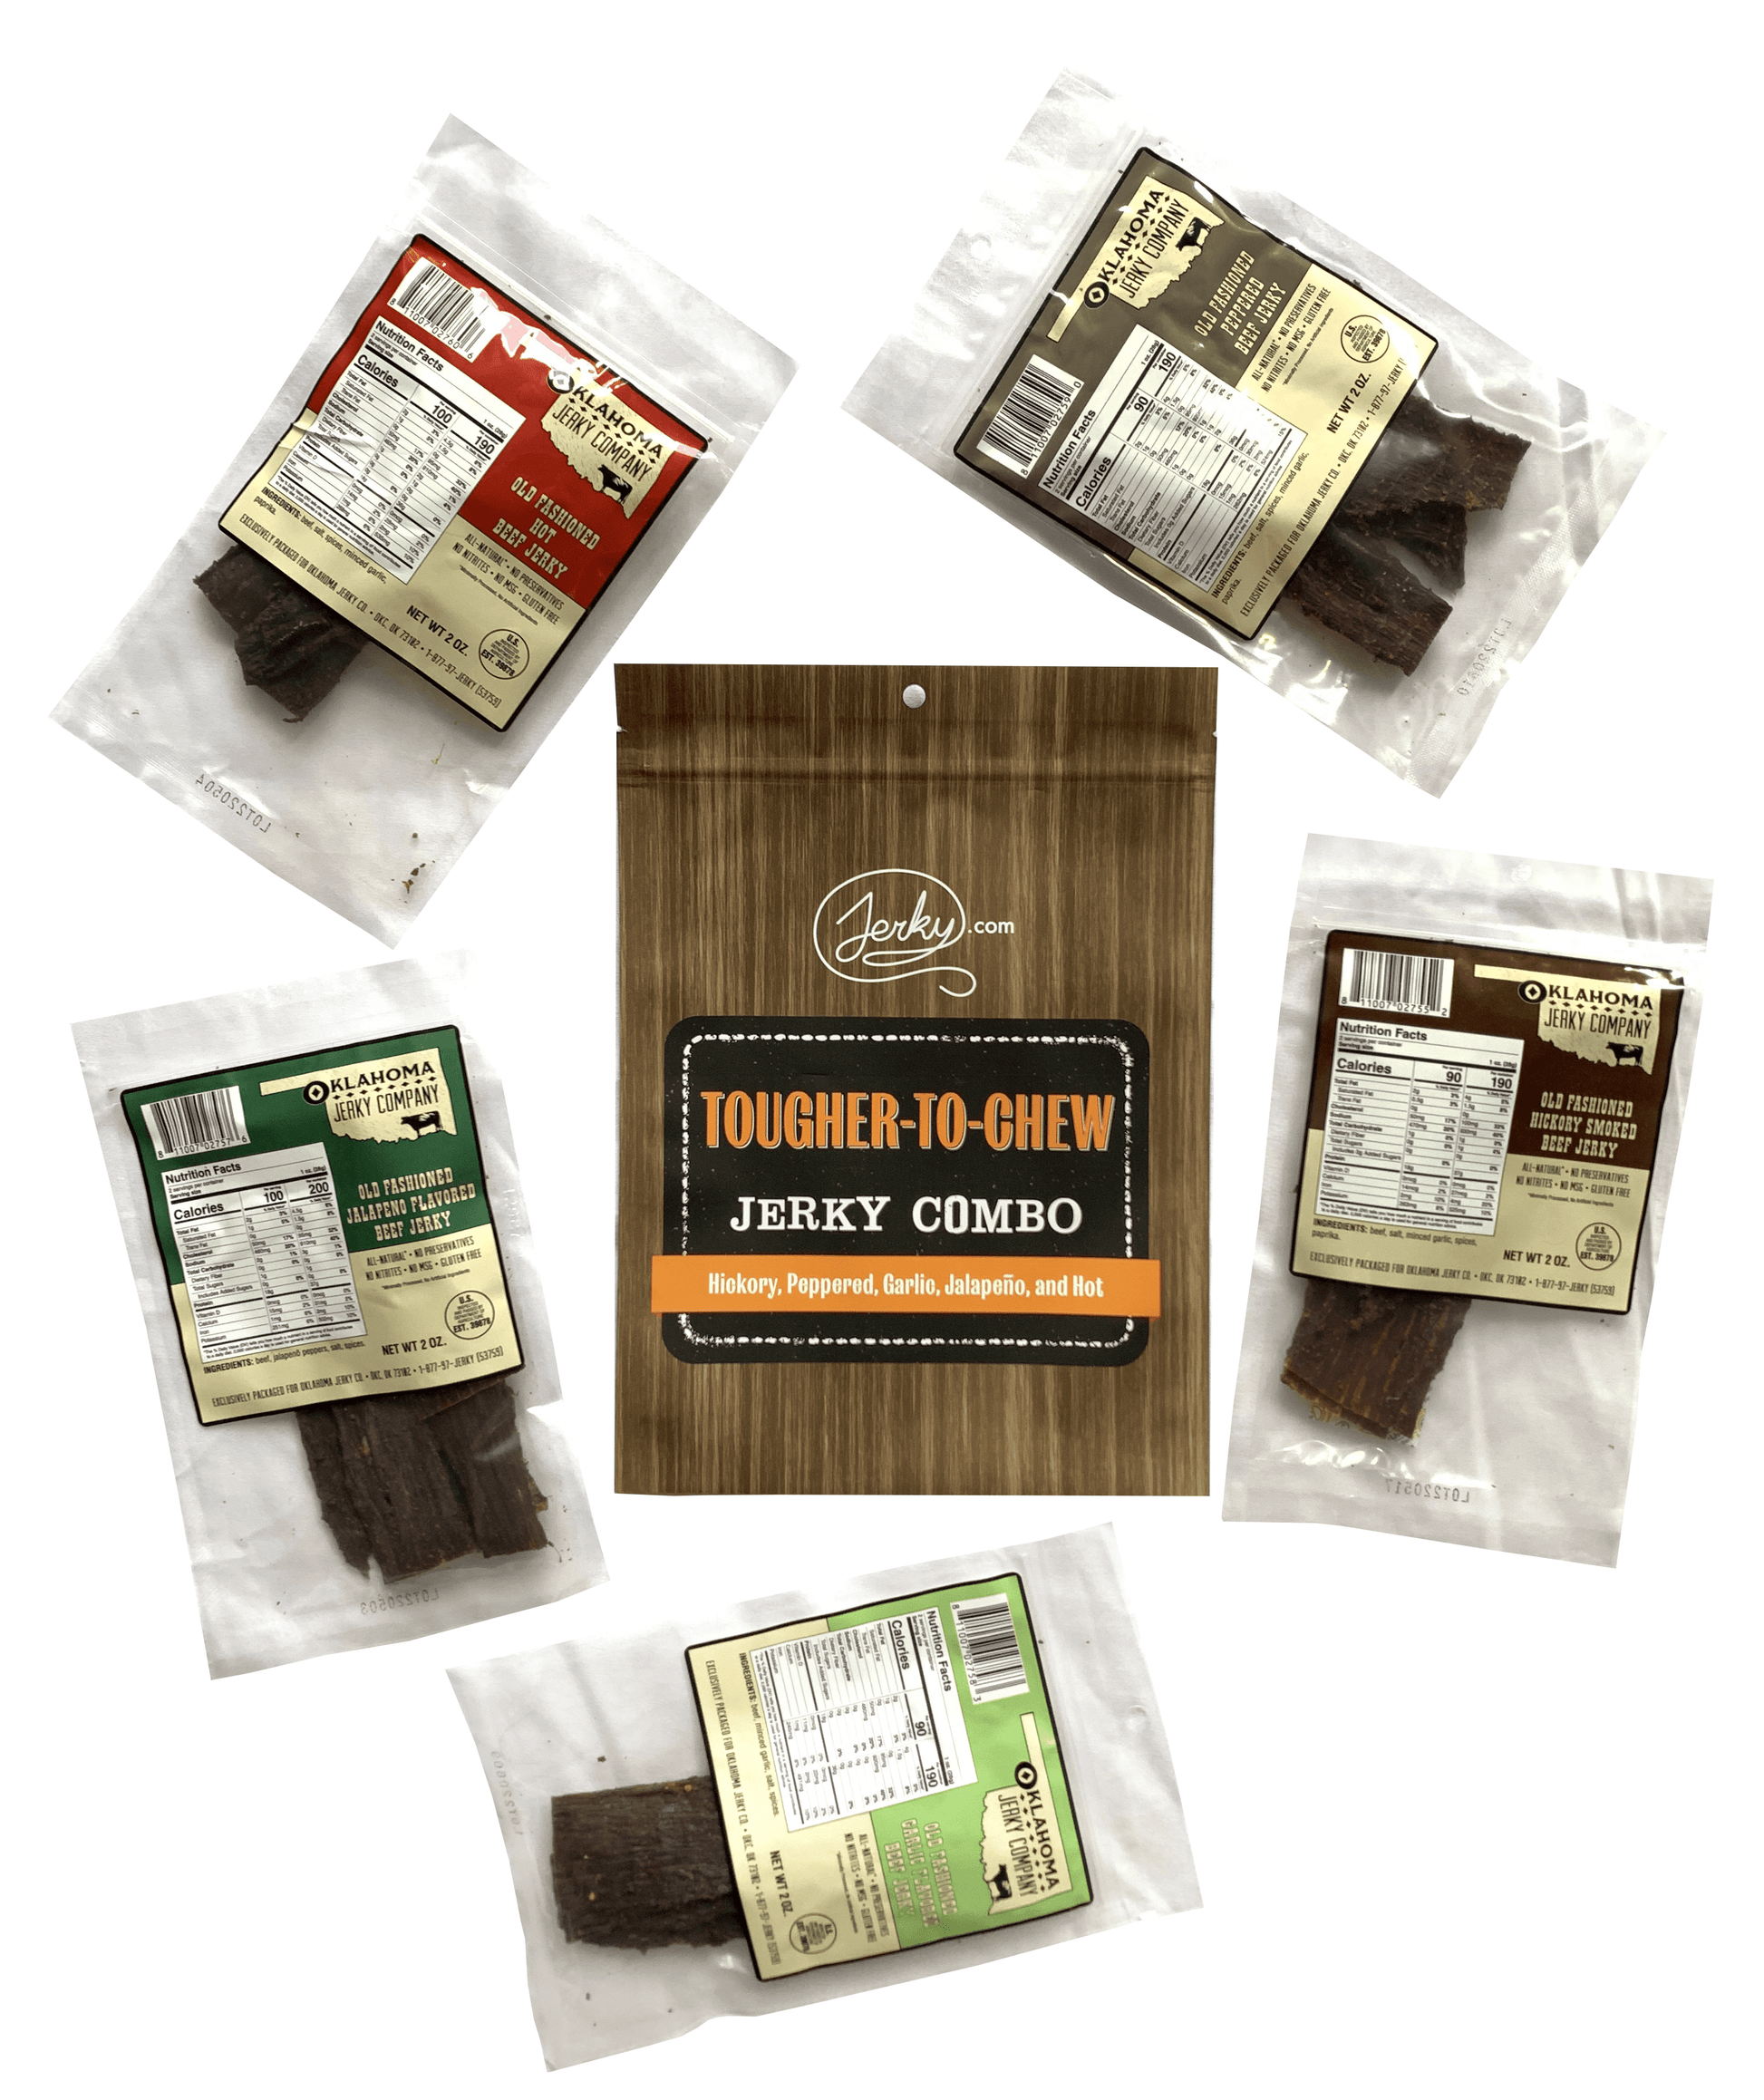 Tougher-to-Chew Combo by Jerky.com